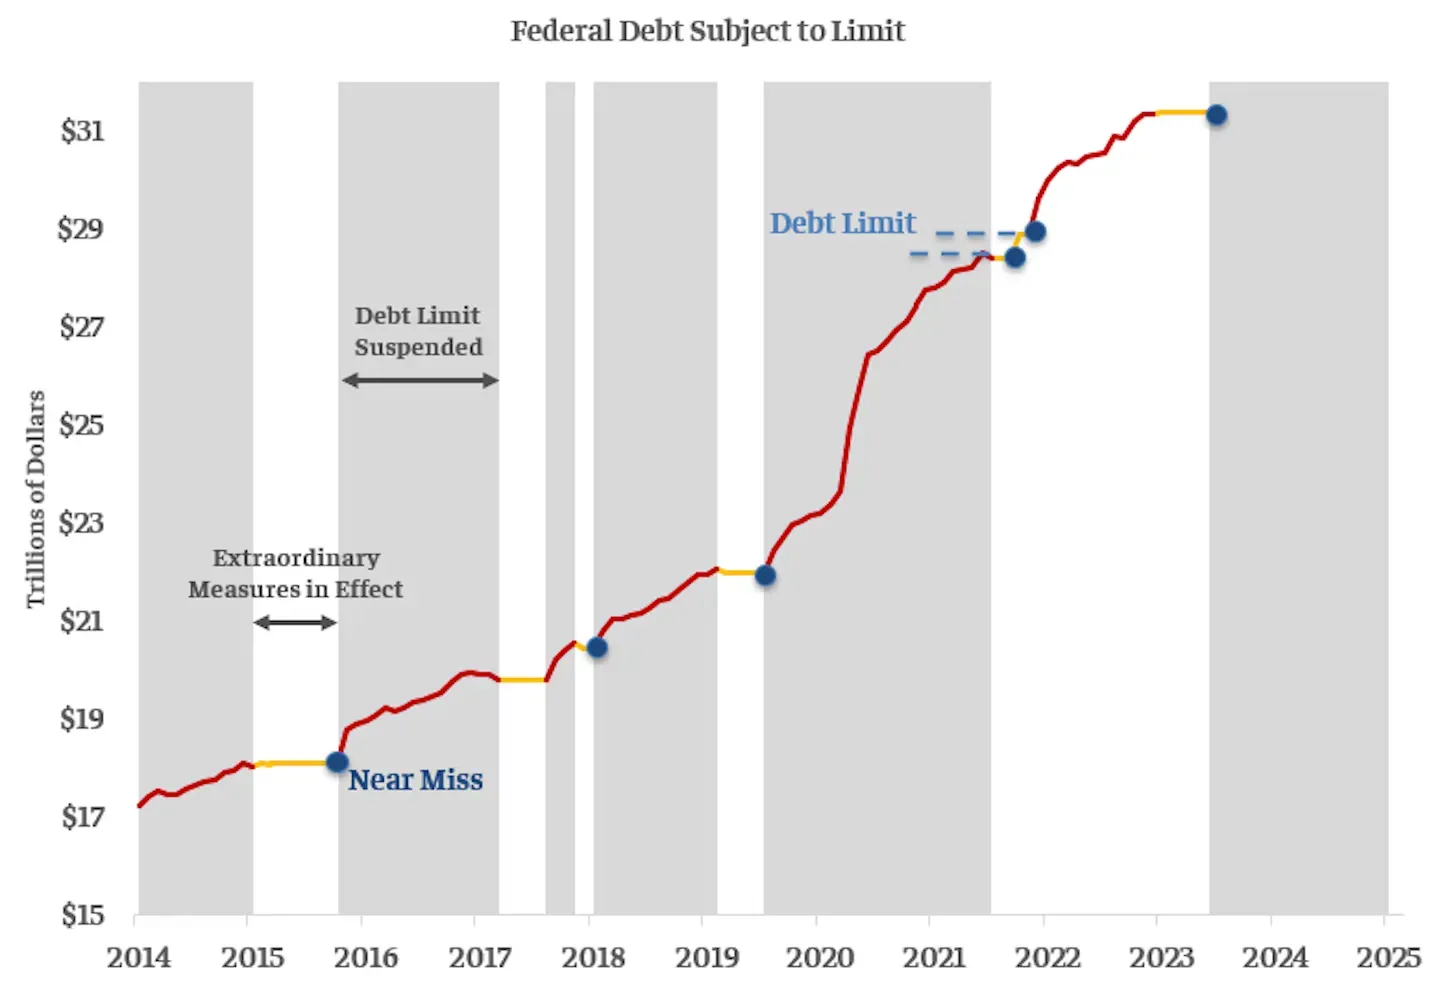 Debt Ceiling Limit from 2014 to 2025